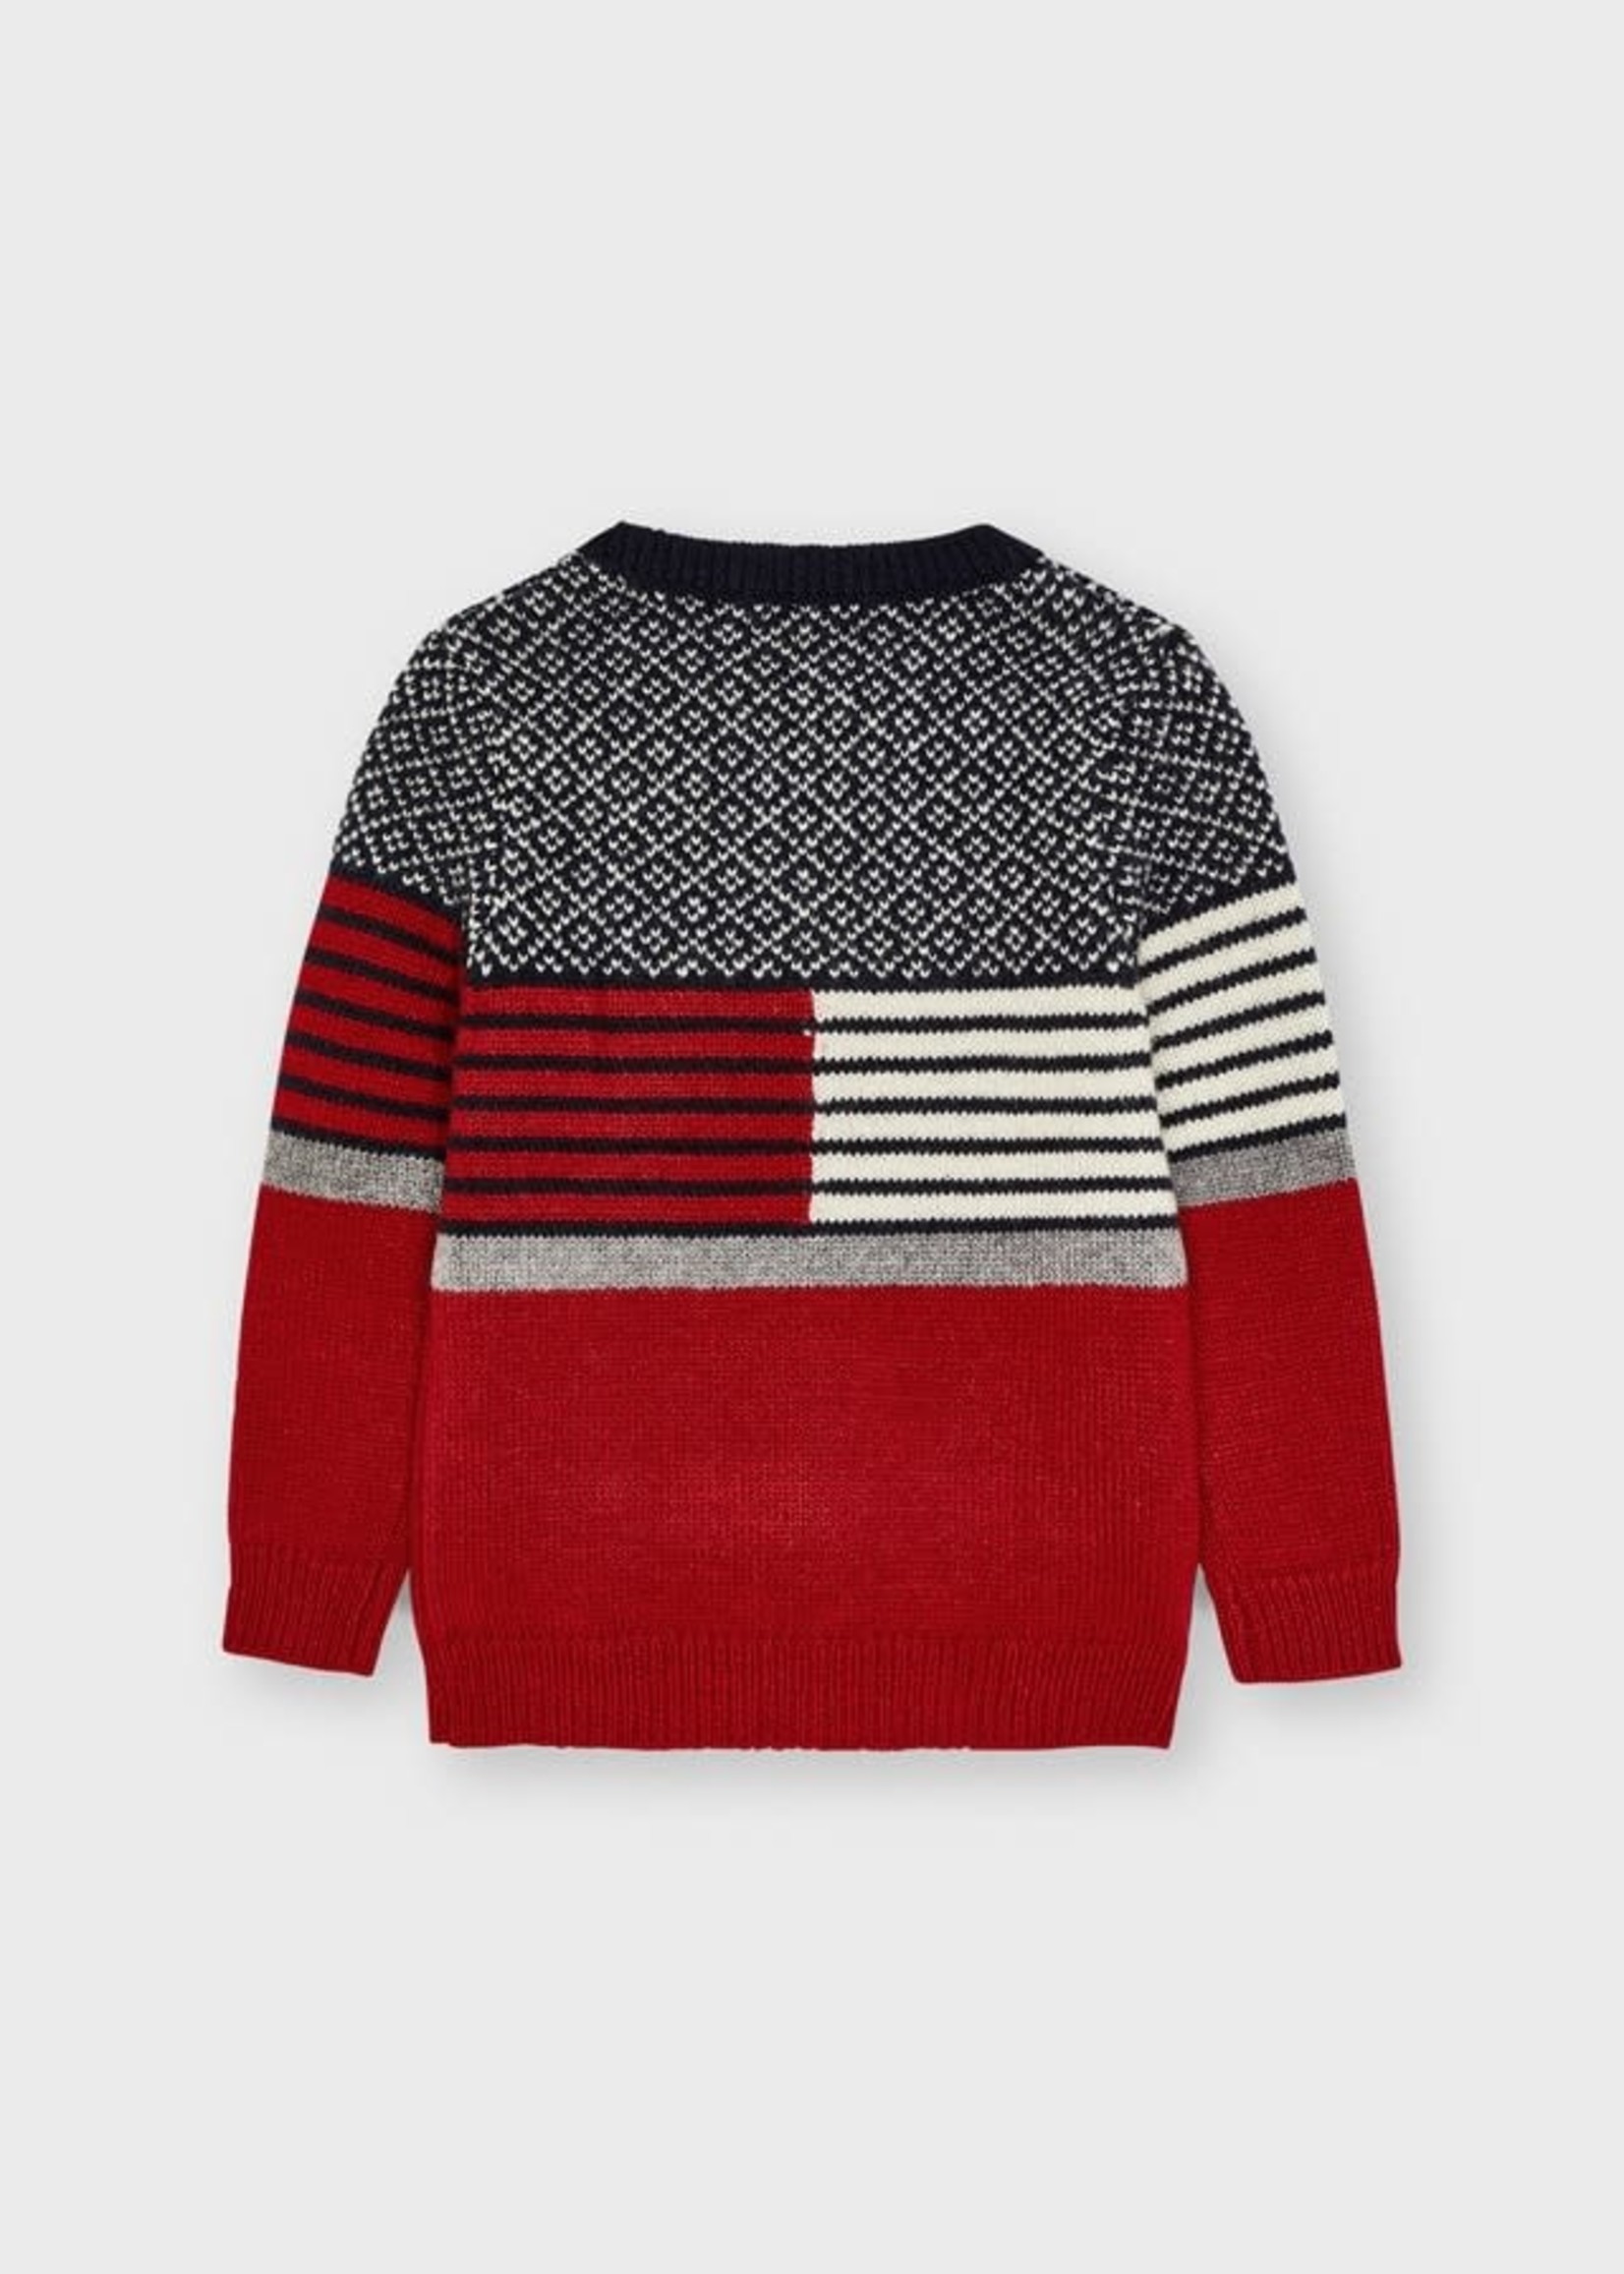 Mayoral Mayoral Block sweater Red mix - 21 04358